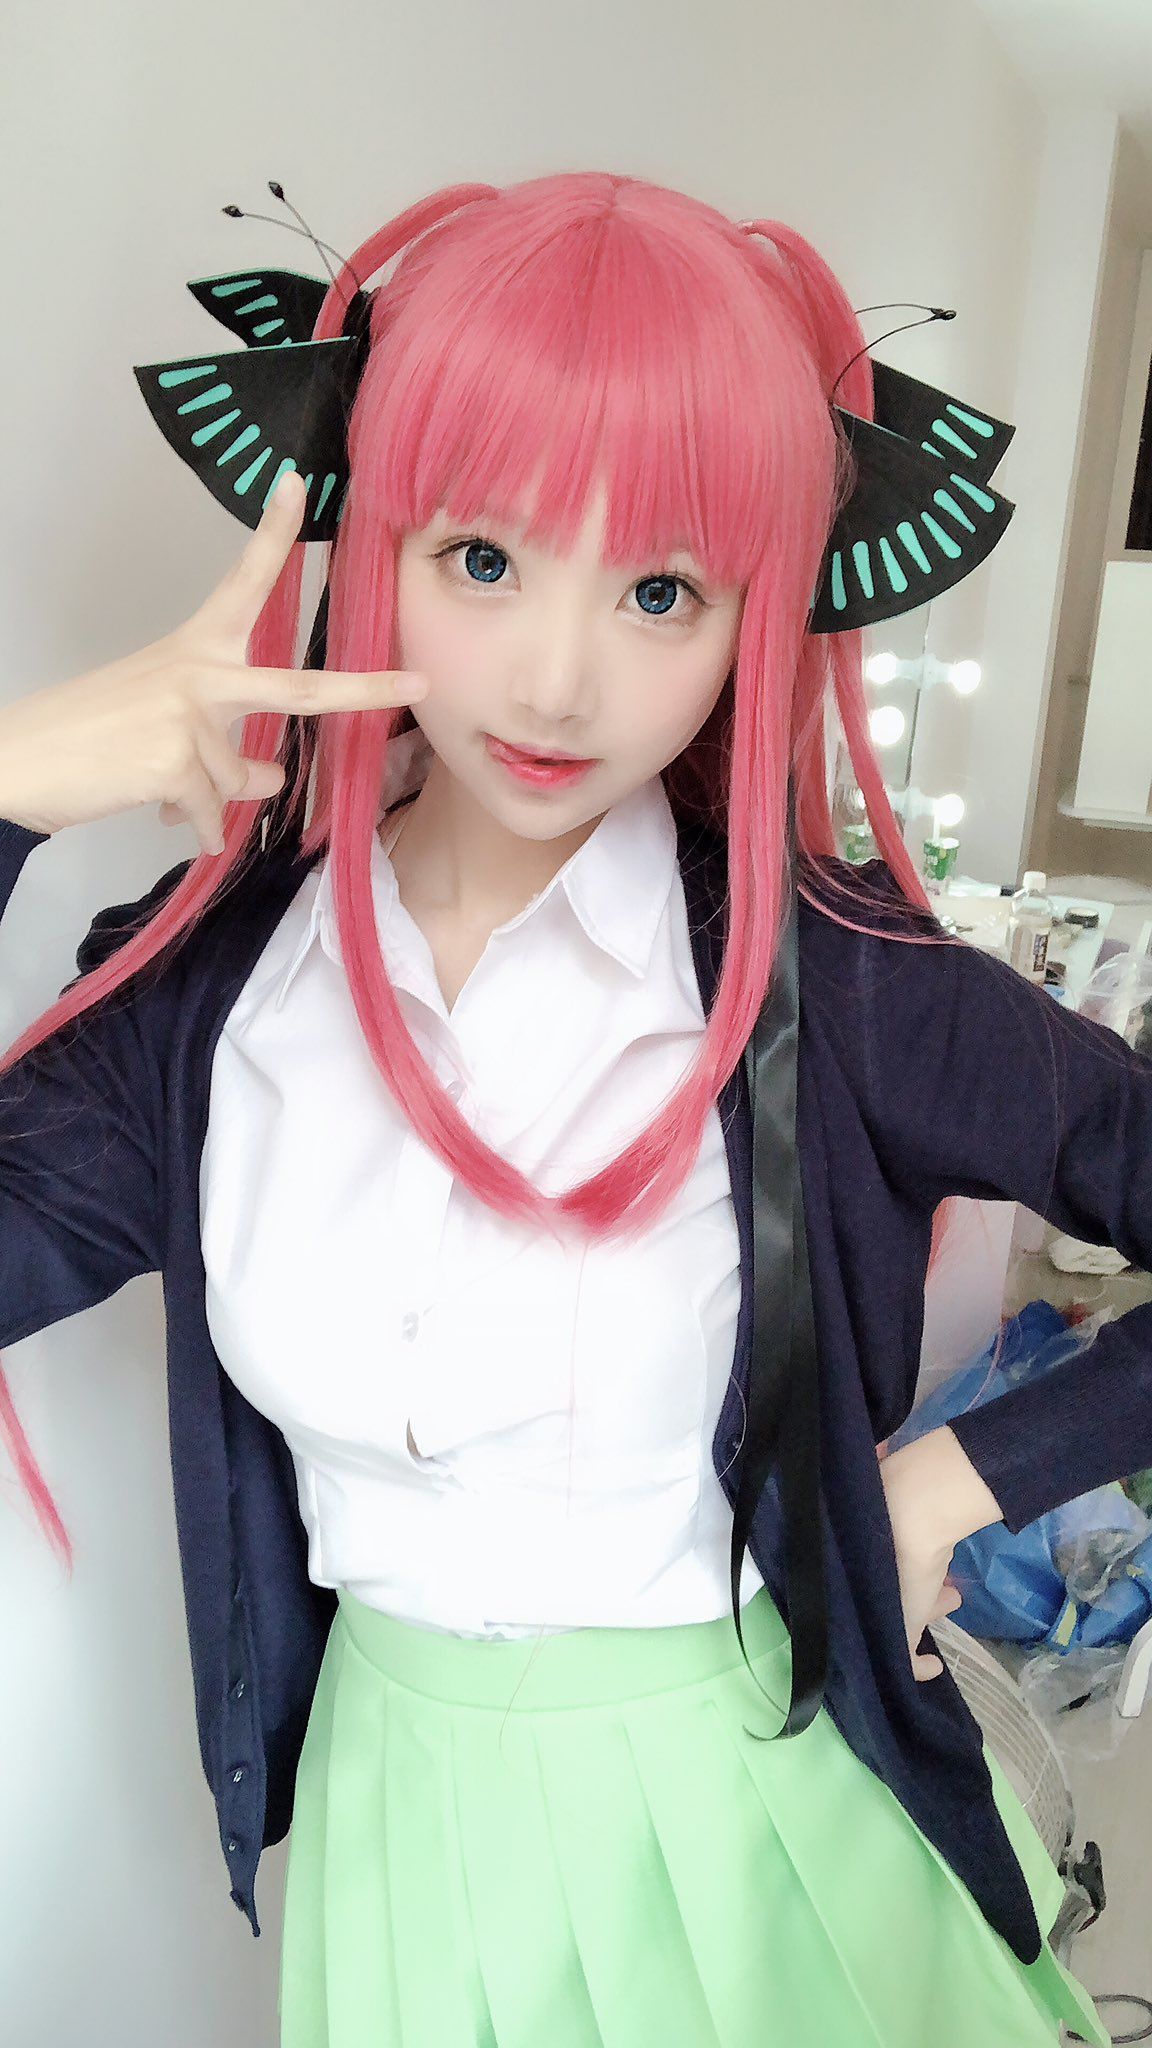 Who are some of the most popular female anime cosplayers of 2021? - Quora